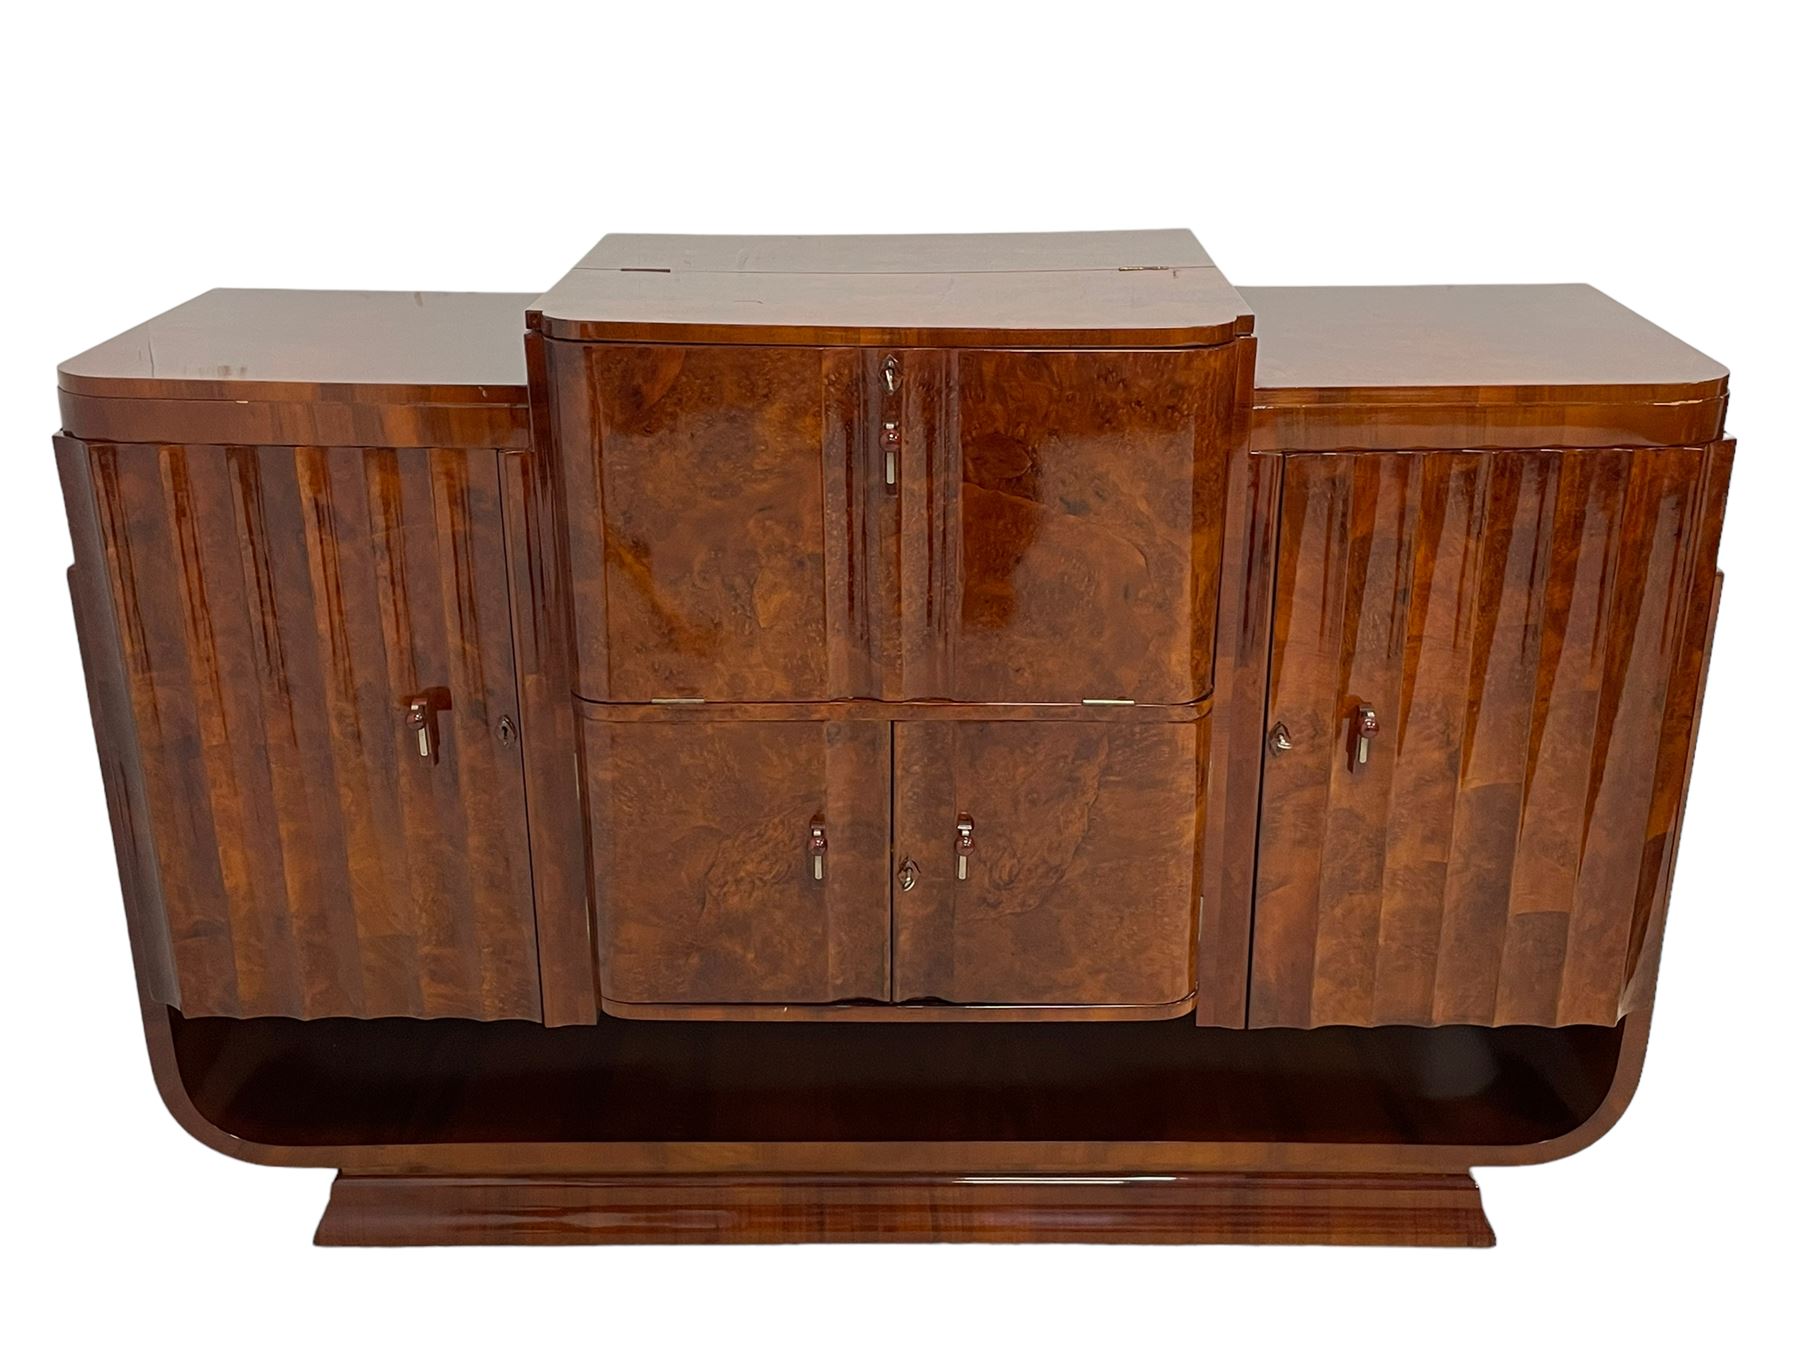 Attributed to Harry & Lou Epstein - Art Deco circa. 1930s figured walnut sideboard - Image 7 of 17